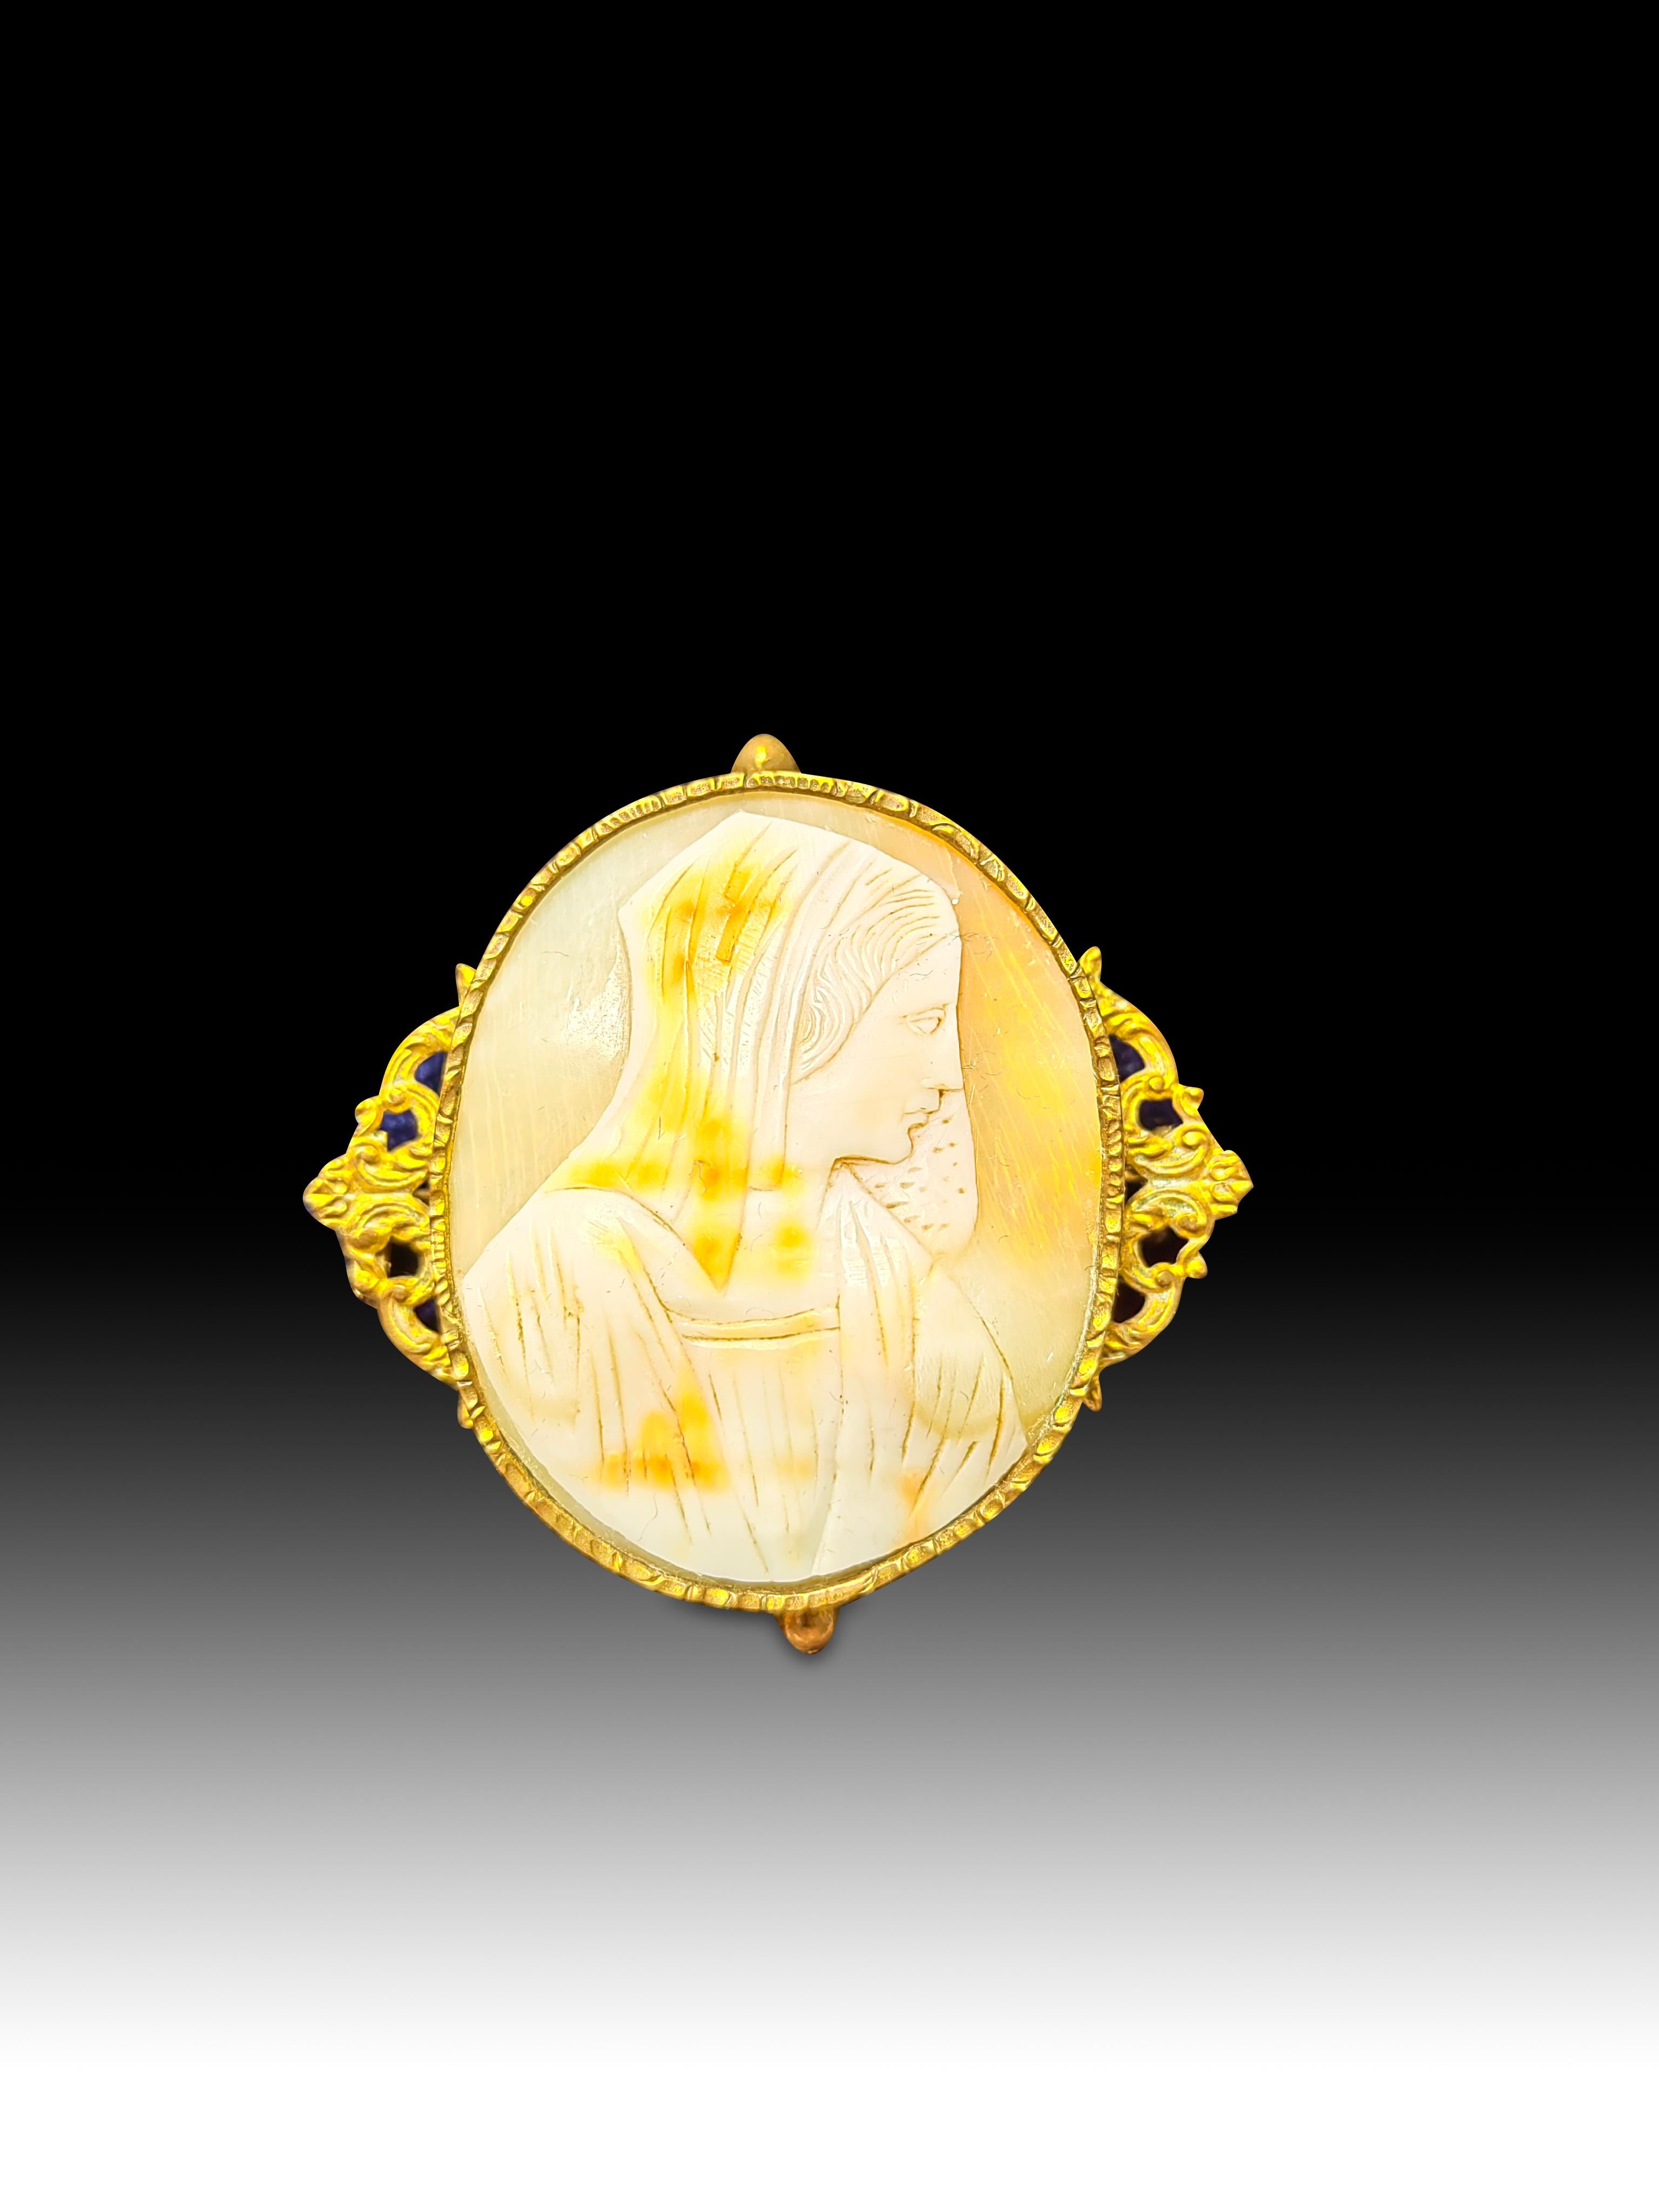 1920s Cameo
Elegant cameo from the 1920s carved in a shell and decorated with gilded brass.Dimensions: 4.5x4x0.5 cm